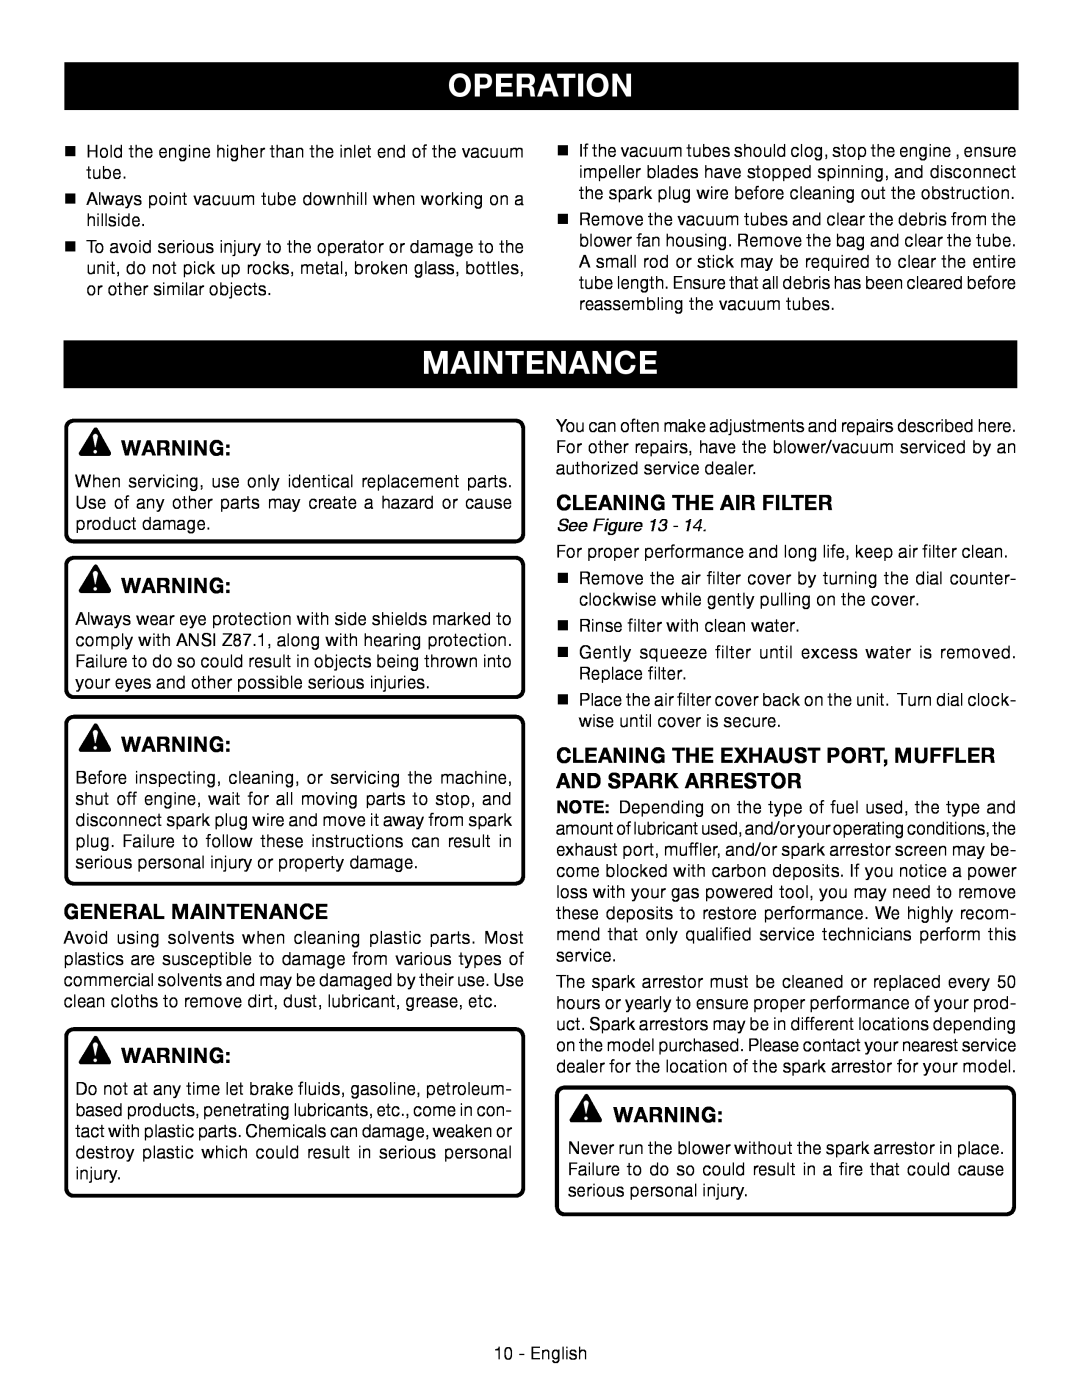 Ryobi RY09053 manuel dutilisation General Maintenance, Cleaning The Air Filter, Operation, See Figure 